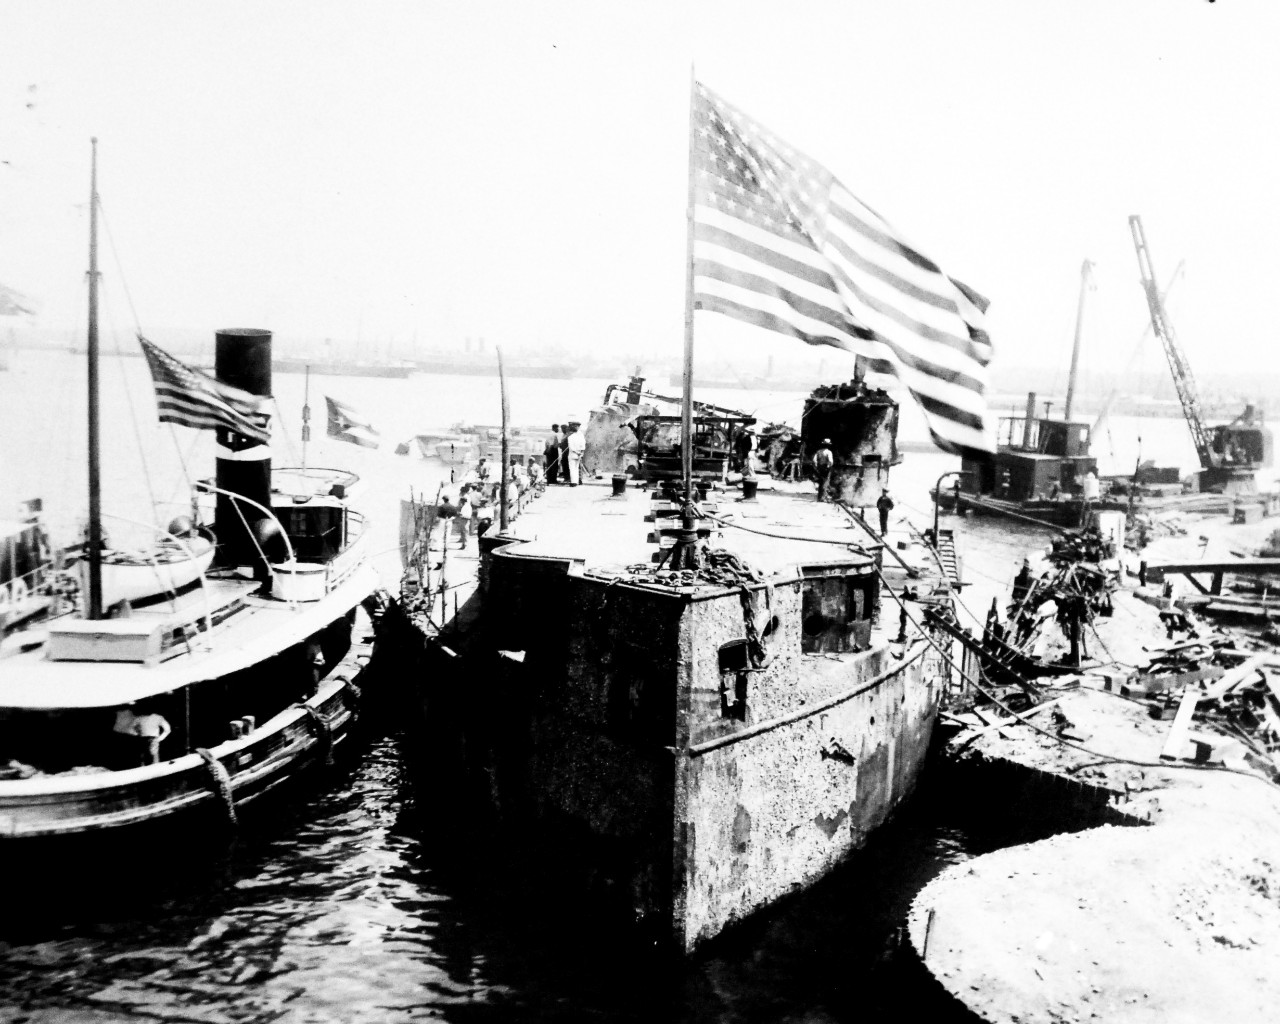 LC-Lot 8936-56:  USS Maine (1895-98), March 1912.   Raising Maine’s wreck in Havana Harbor, Cuba, March, 1912.  Shown: Maine wreck moored outside of cofferdam, alongside USS Osceola (Fleet Tug 47).   Maine exploded on February 15, 1898, and was one of the causes for the United States to enter war with Spain, Spanish-American War, April-August 1898.  Transfer from the War Department, Washington.   Courtesy of the Library of Congress.   (2015/10/2).